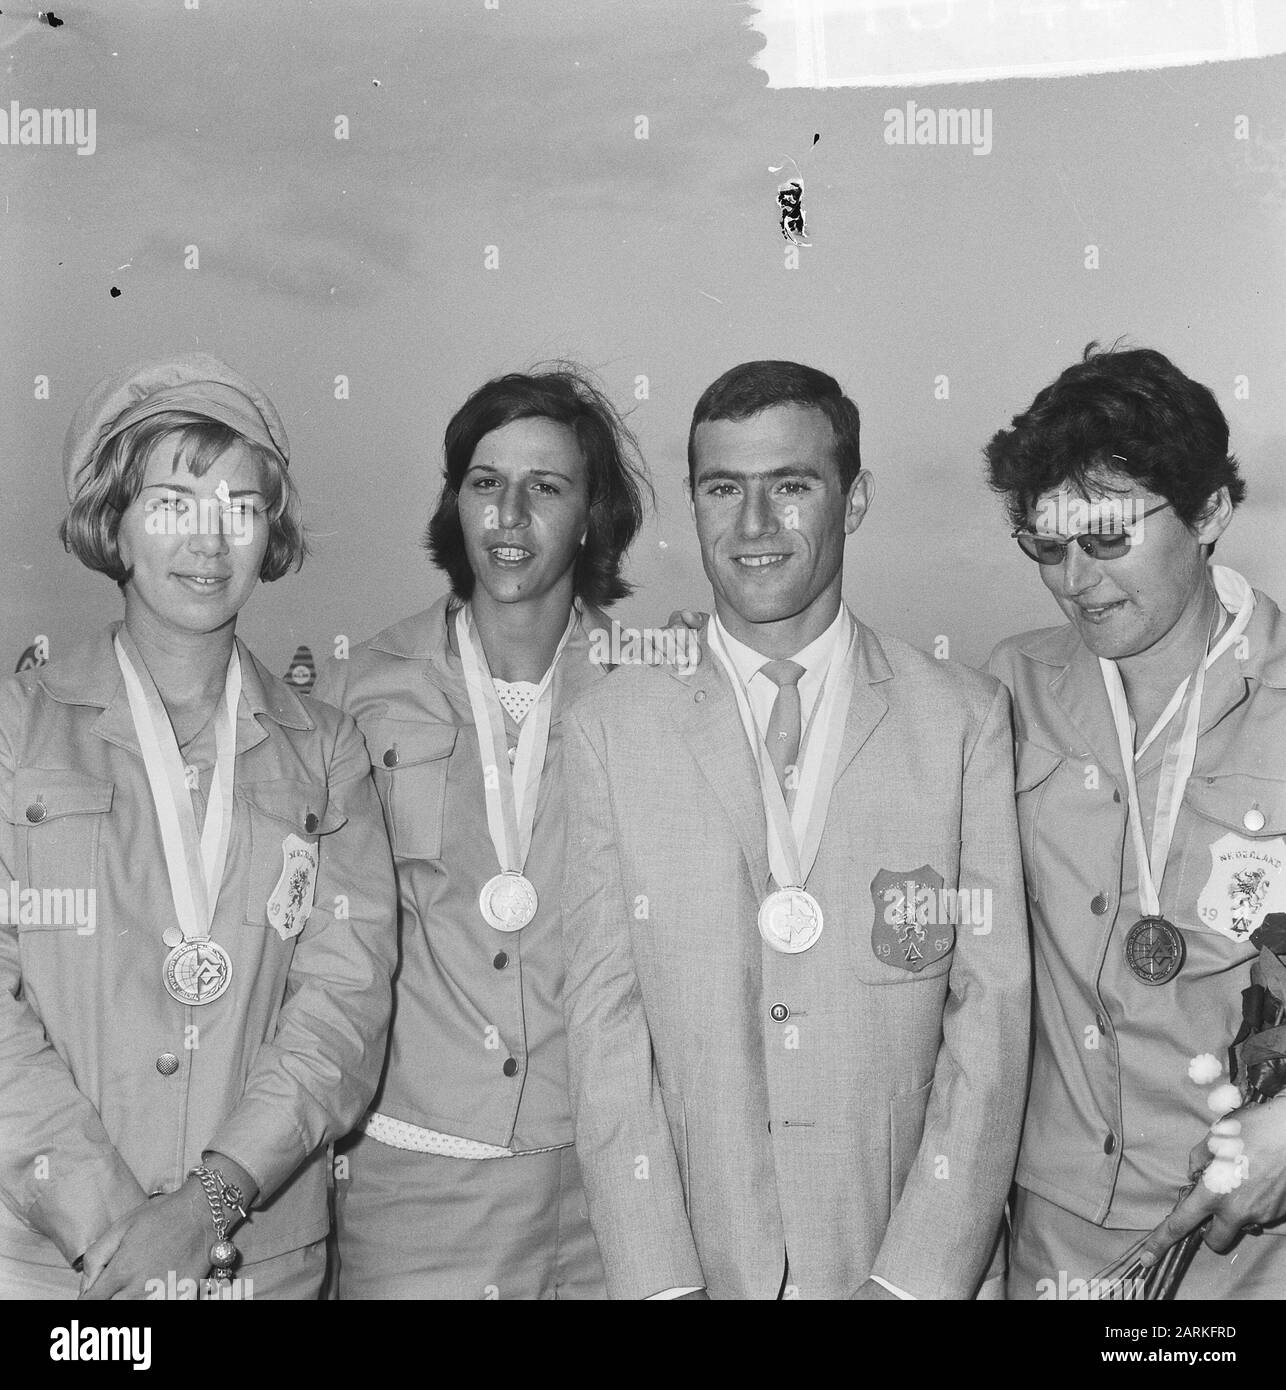 Back from Israel of the Maccabiade, v.l.n.r. Ineke van Wezel, Carry Piller, Rob Redeker and Selma Heijstek (all gold) Date: September 5, 1965 Location: Israel Keywords: arrivals Personal name: Maccabia Stock Photo